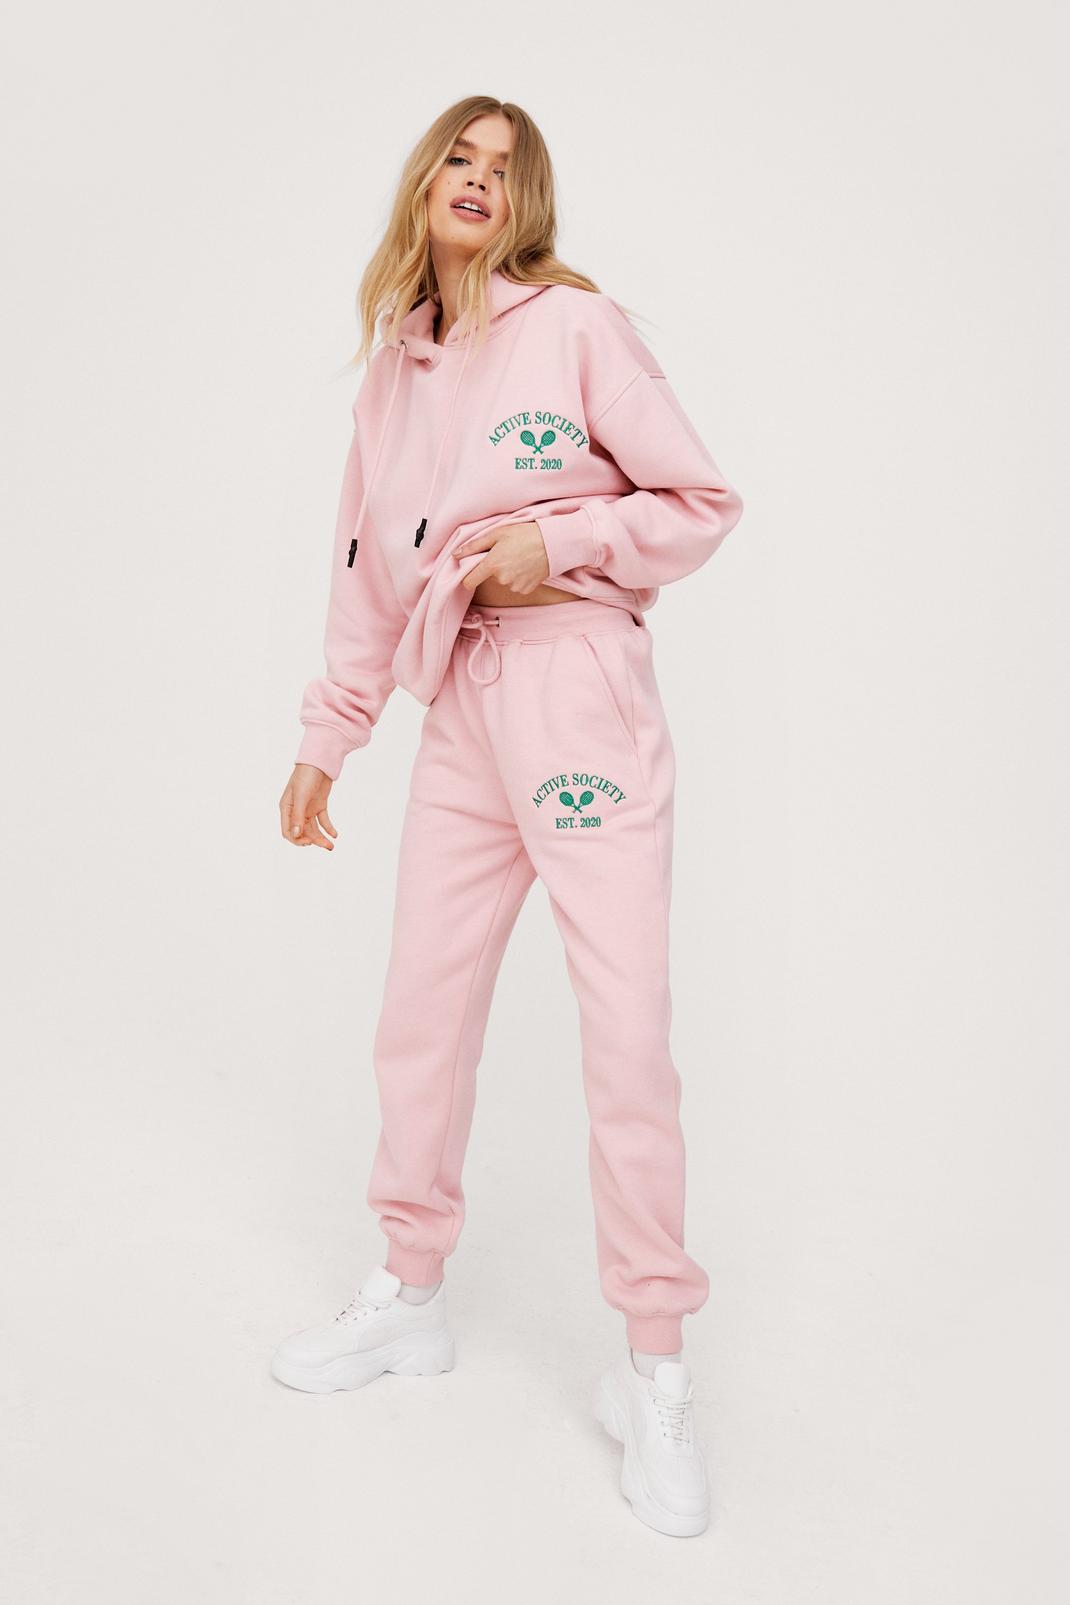 Blush Active Society Embroidered Cuffed Sweatpants image number 1